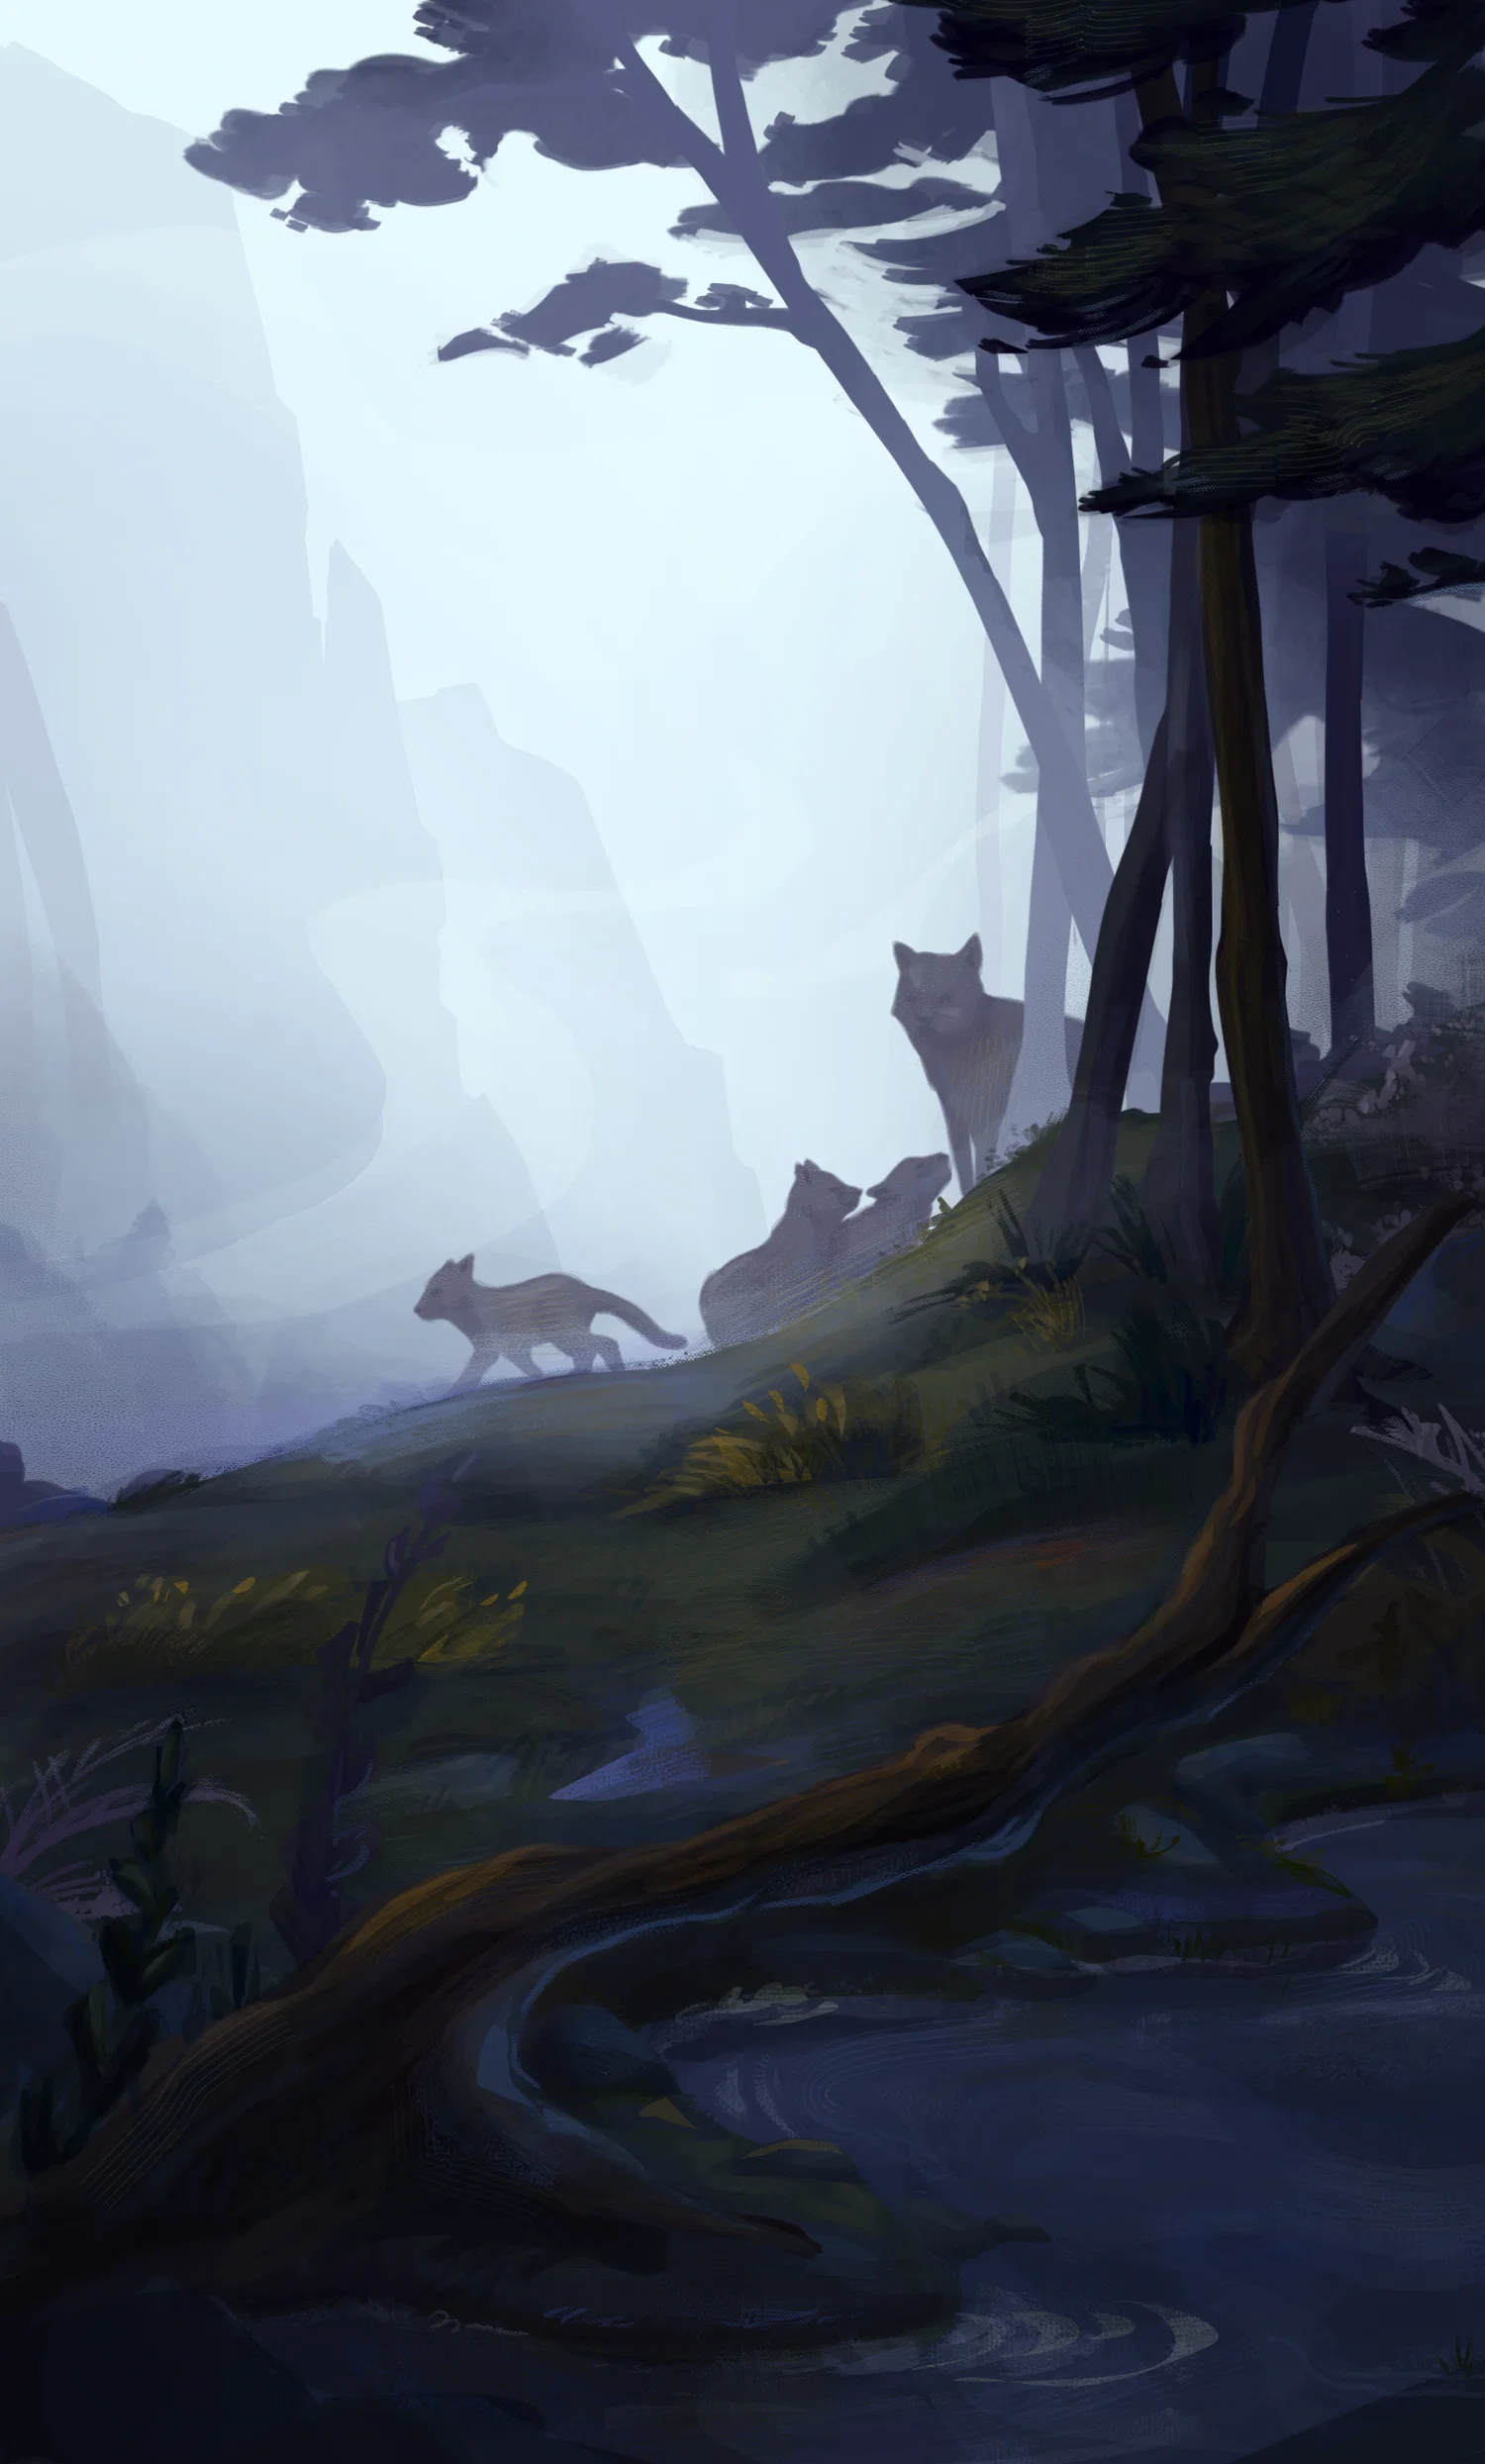 A wolf and her pups in a foggy forest